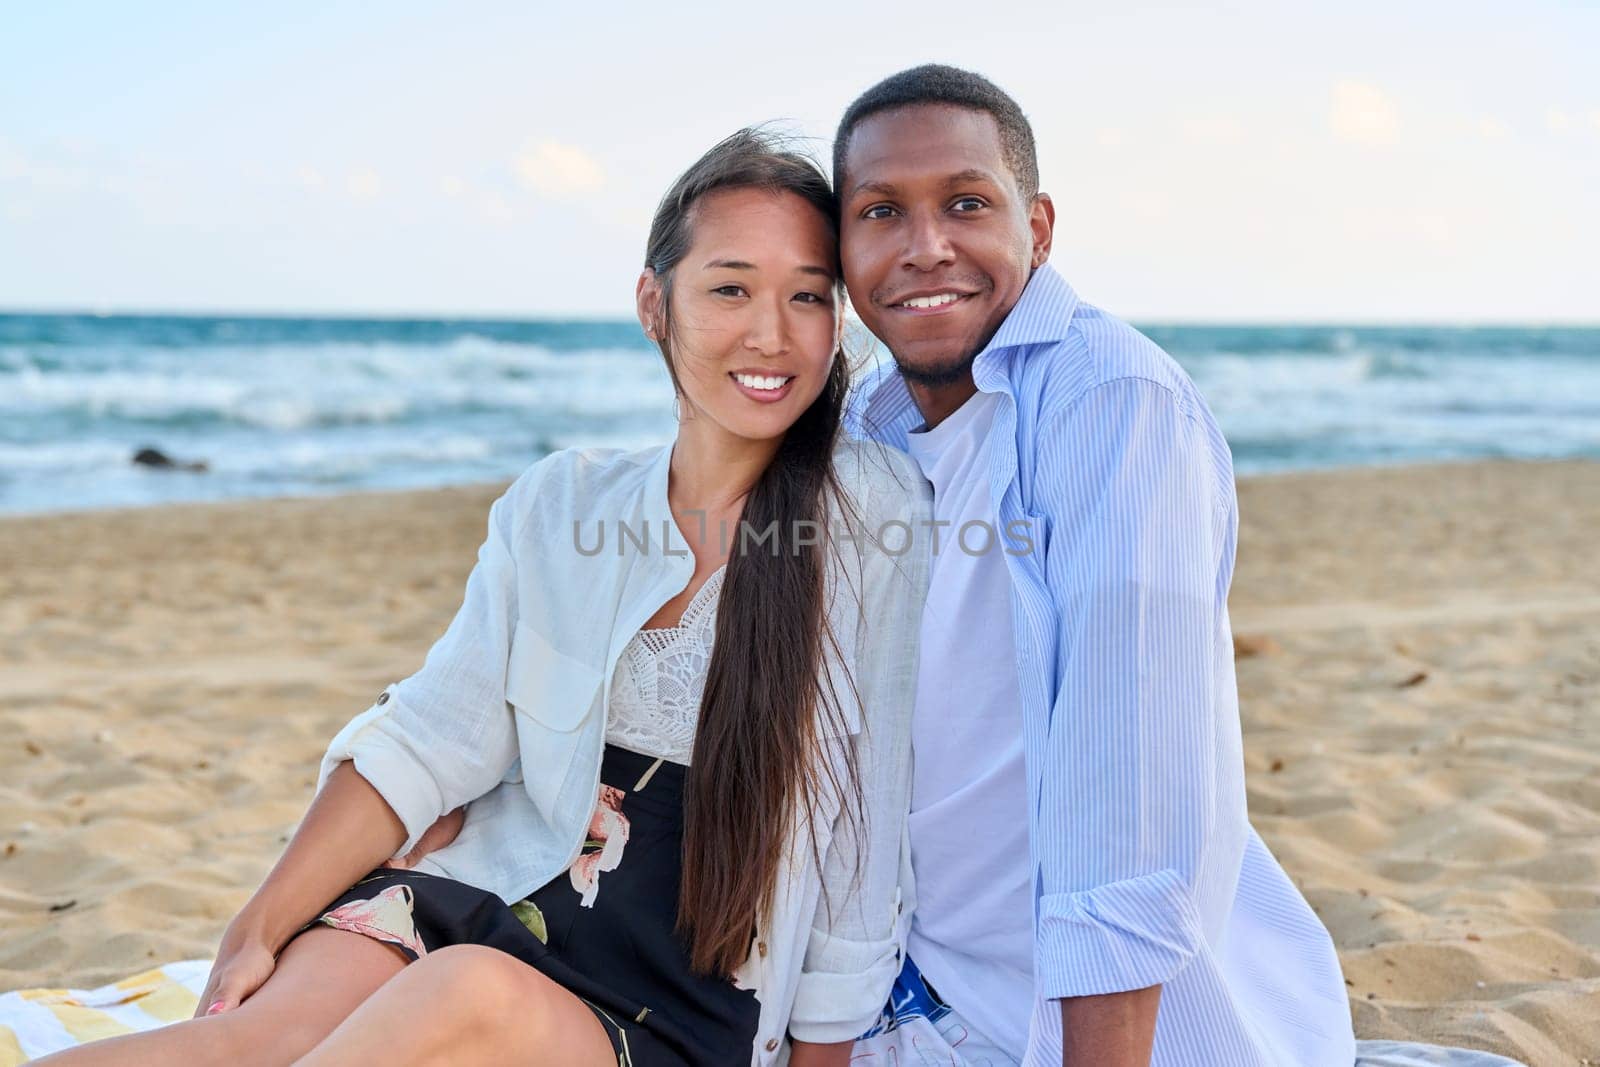 Happy multiethnic family resting on beach together. Asian woman and African man seated hugging each other on sand. Relationships, vacation travel and tourism at seaside resorts, people 20 30 years old